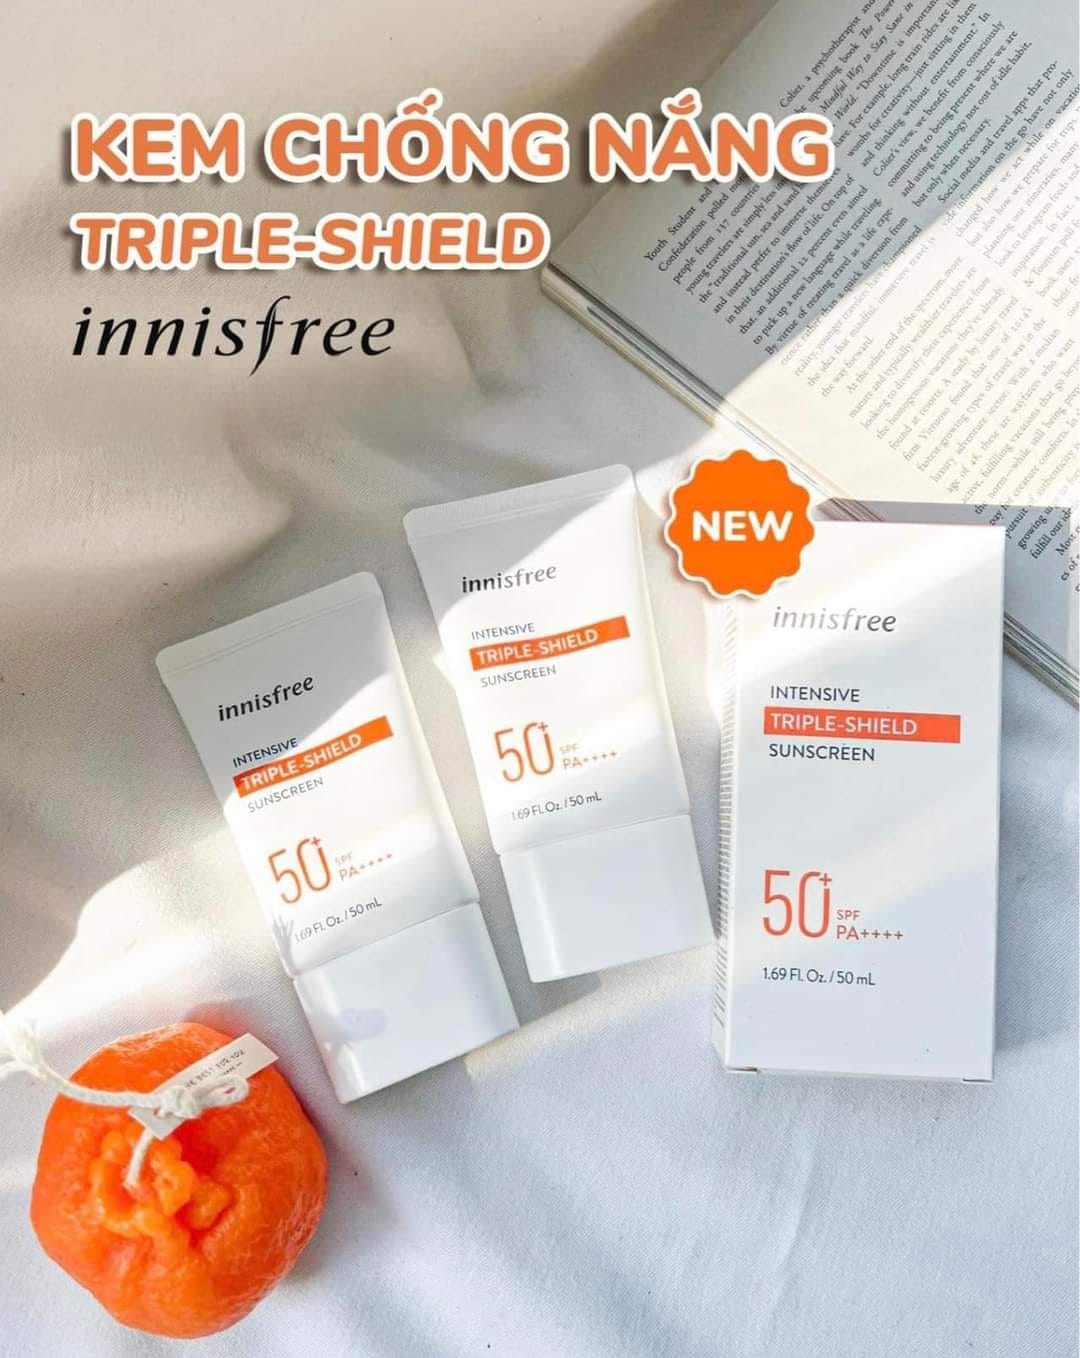 Review Kem Chống Nắng Innisfree Intensive Triple-shield Sunscreen 】